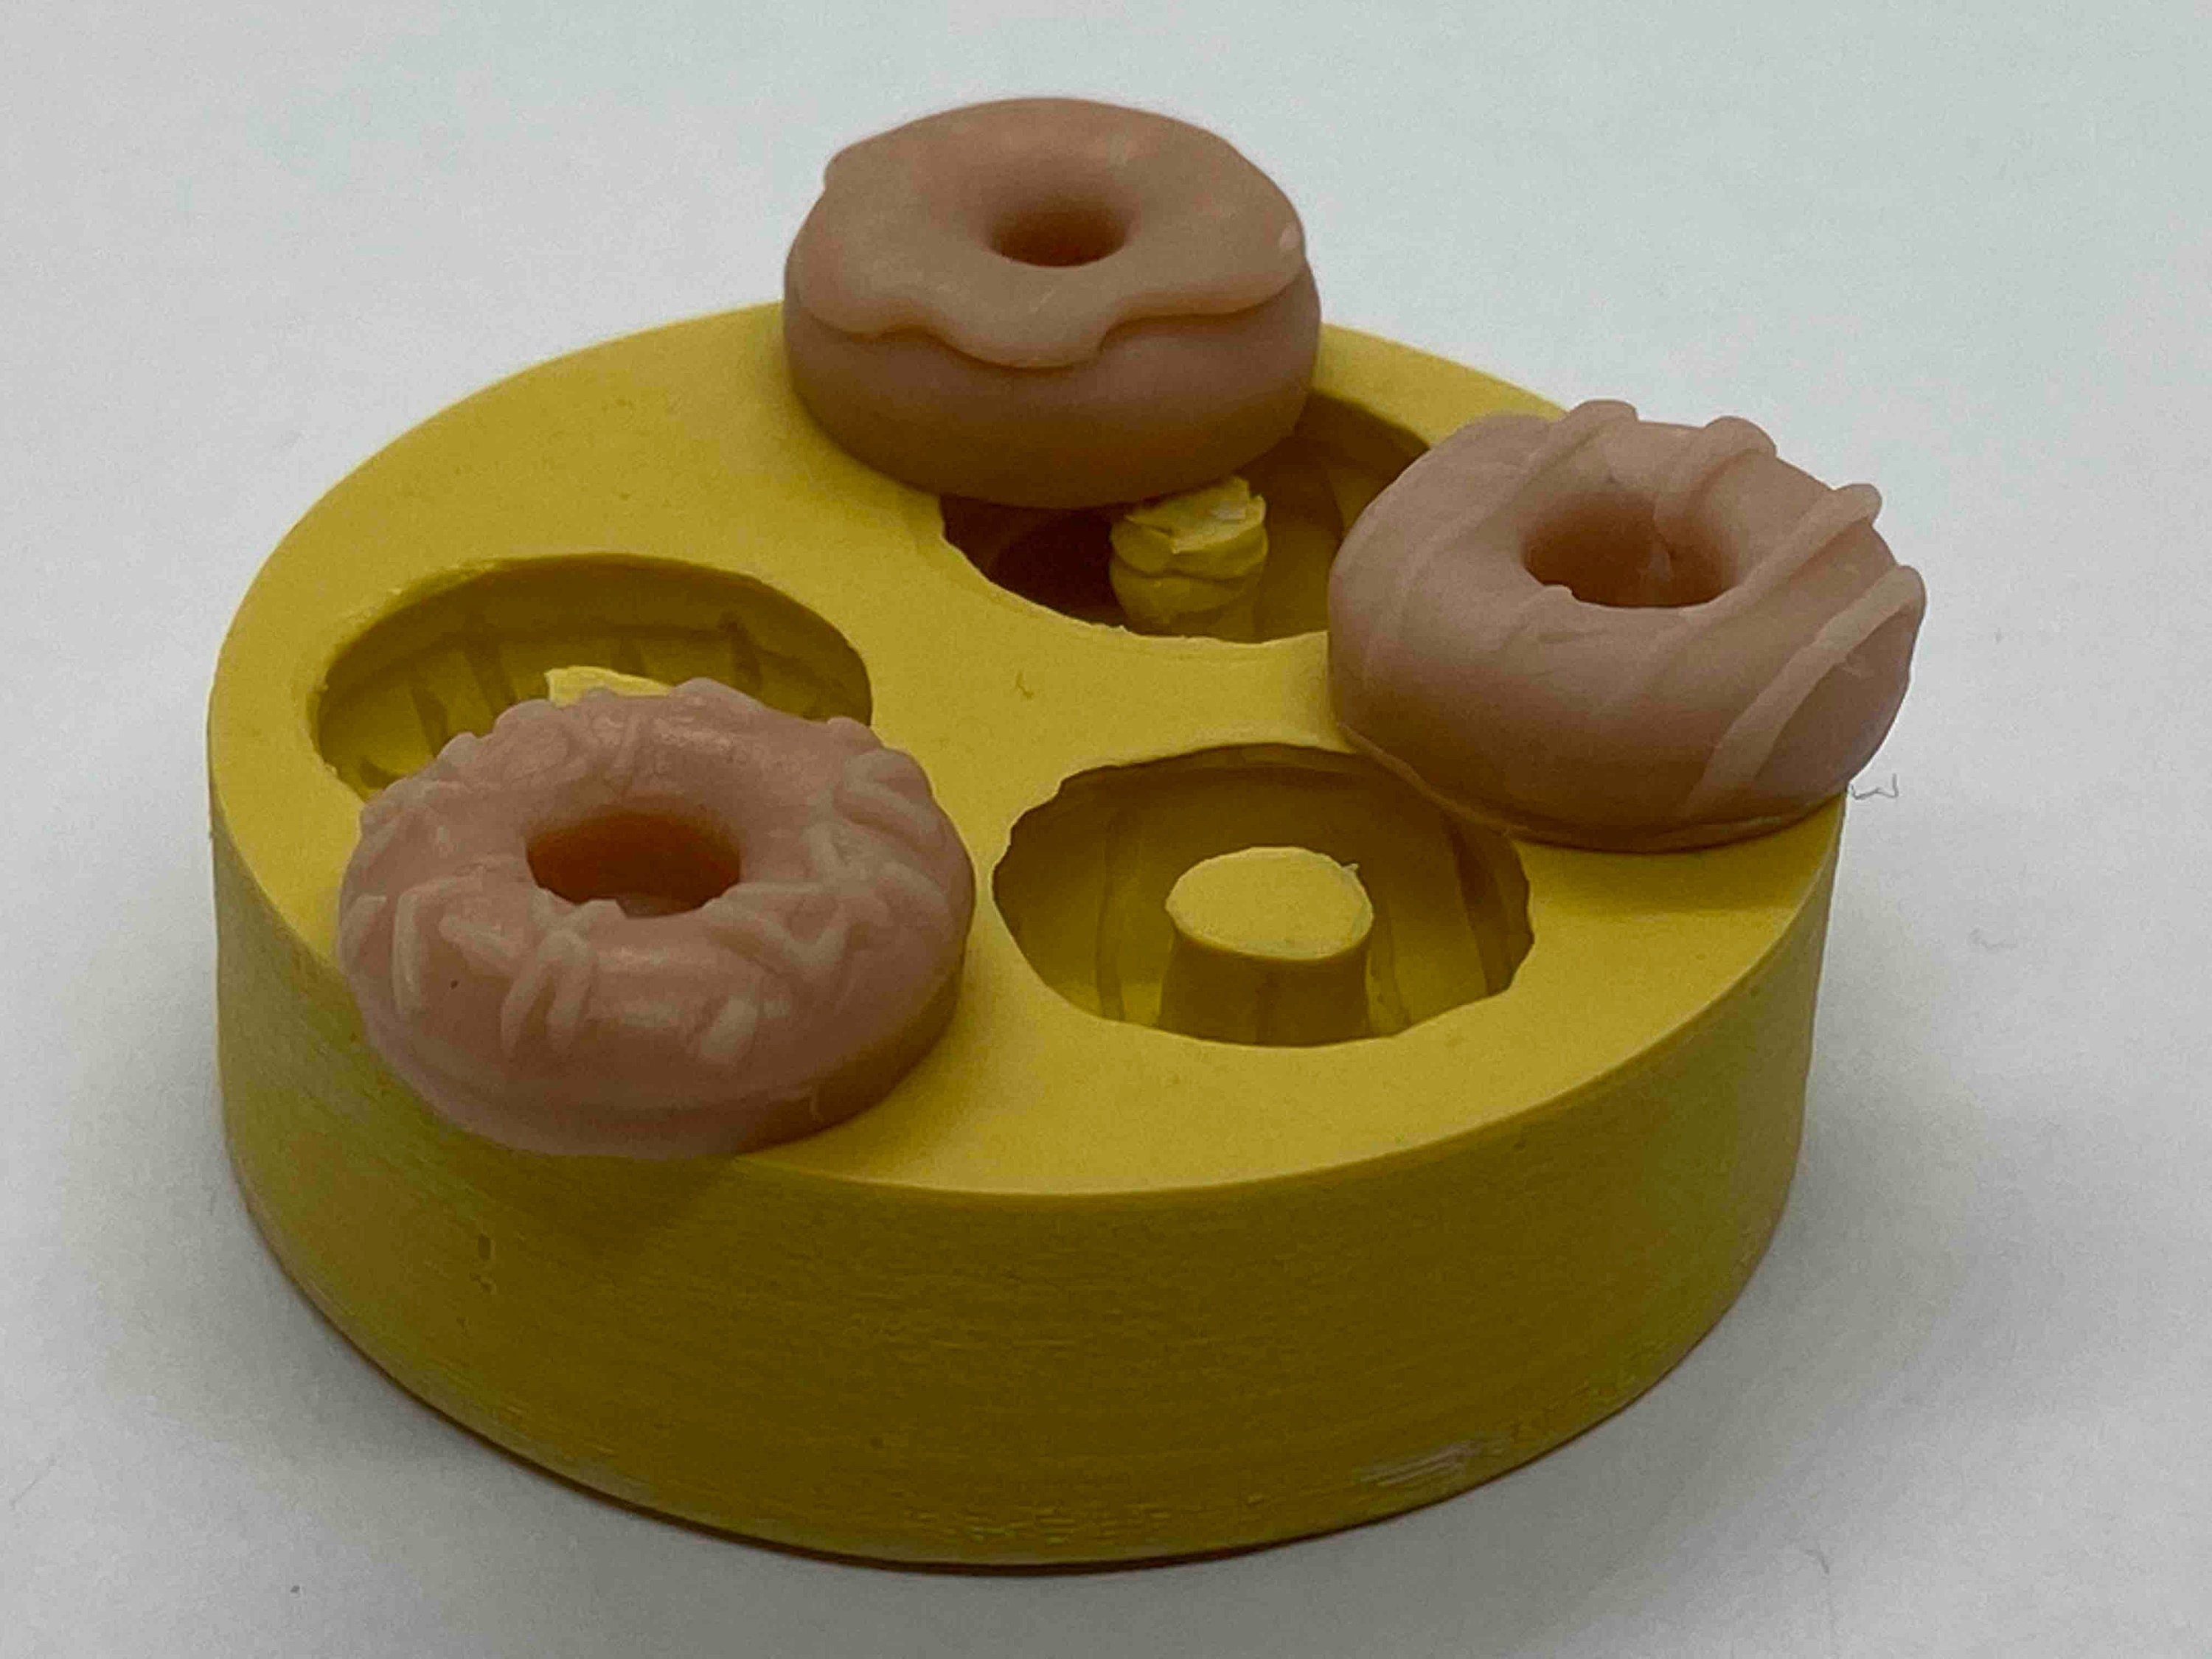 Ozera Silicone Mini Donut Pan, 18 Cavity Doughnut Baking Mold Tray - Muffin  Cups, Cake Mold, Biscuit Mold